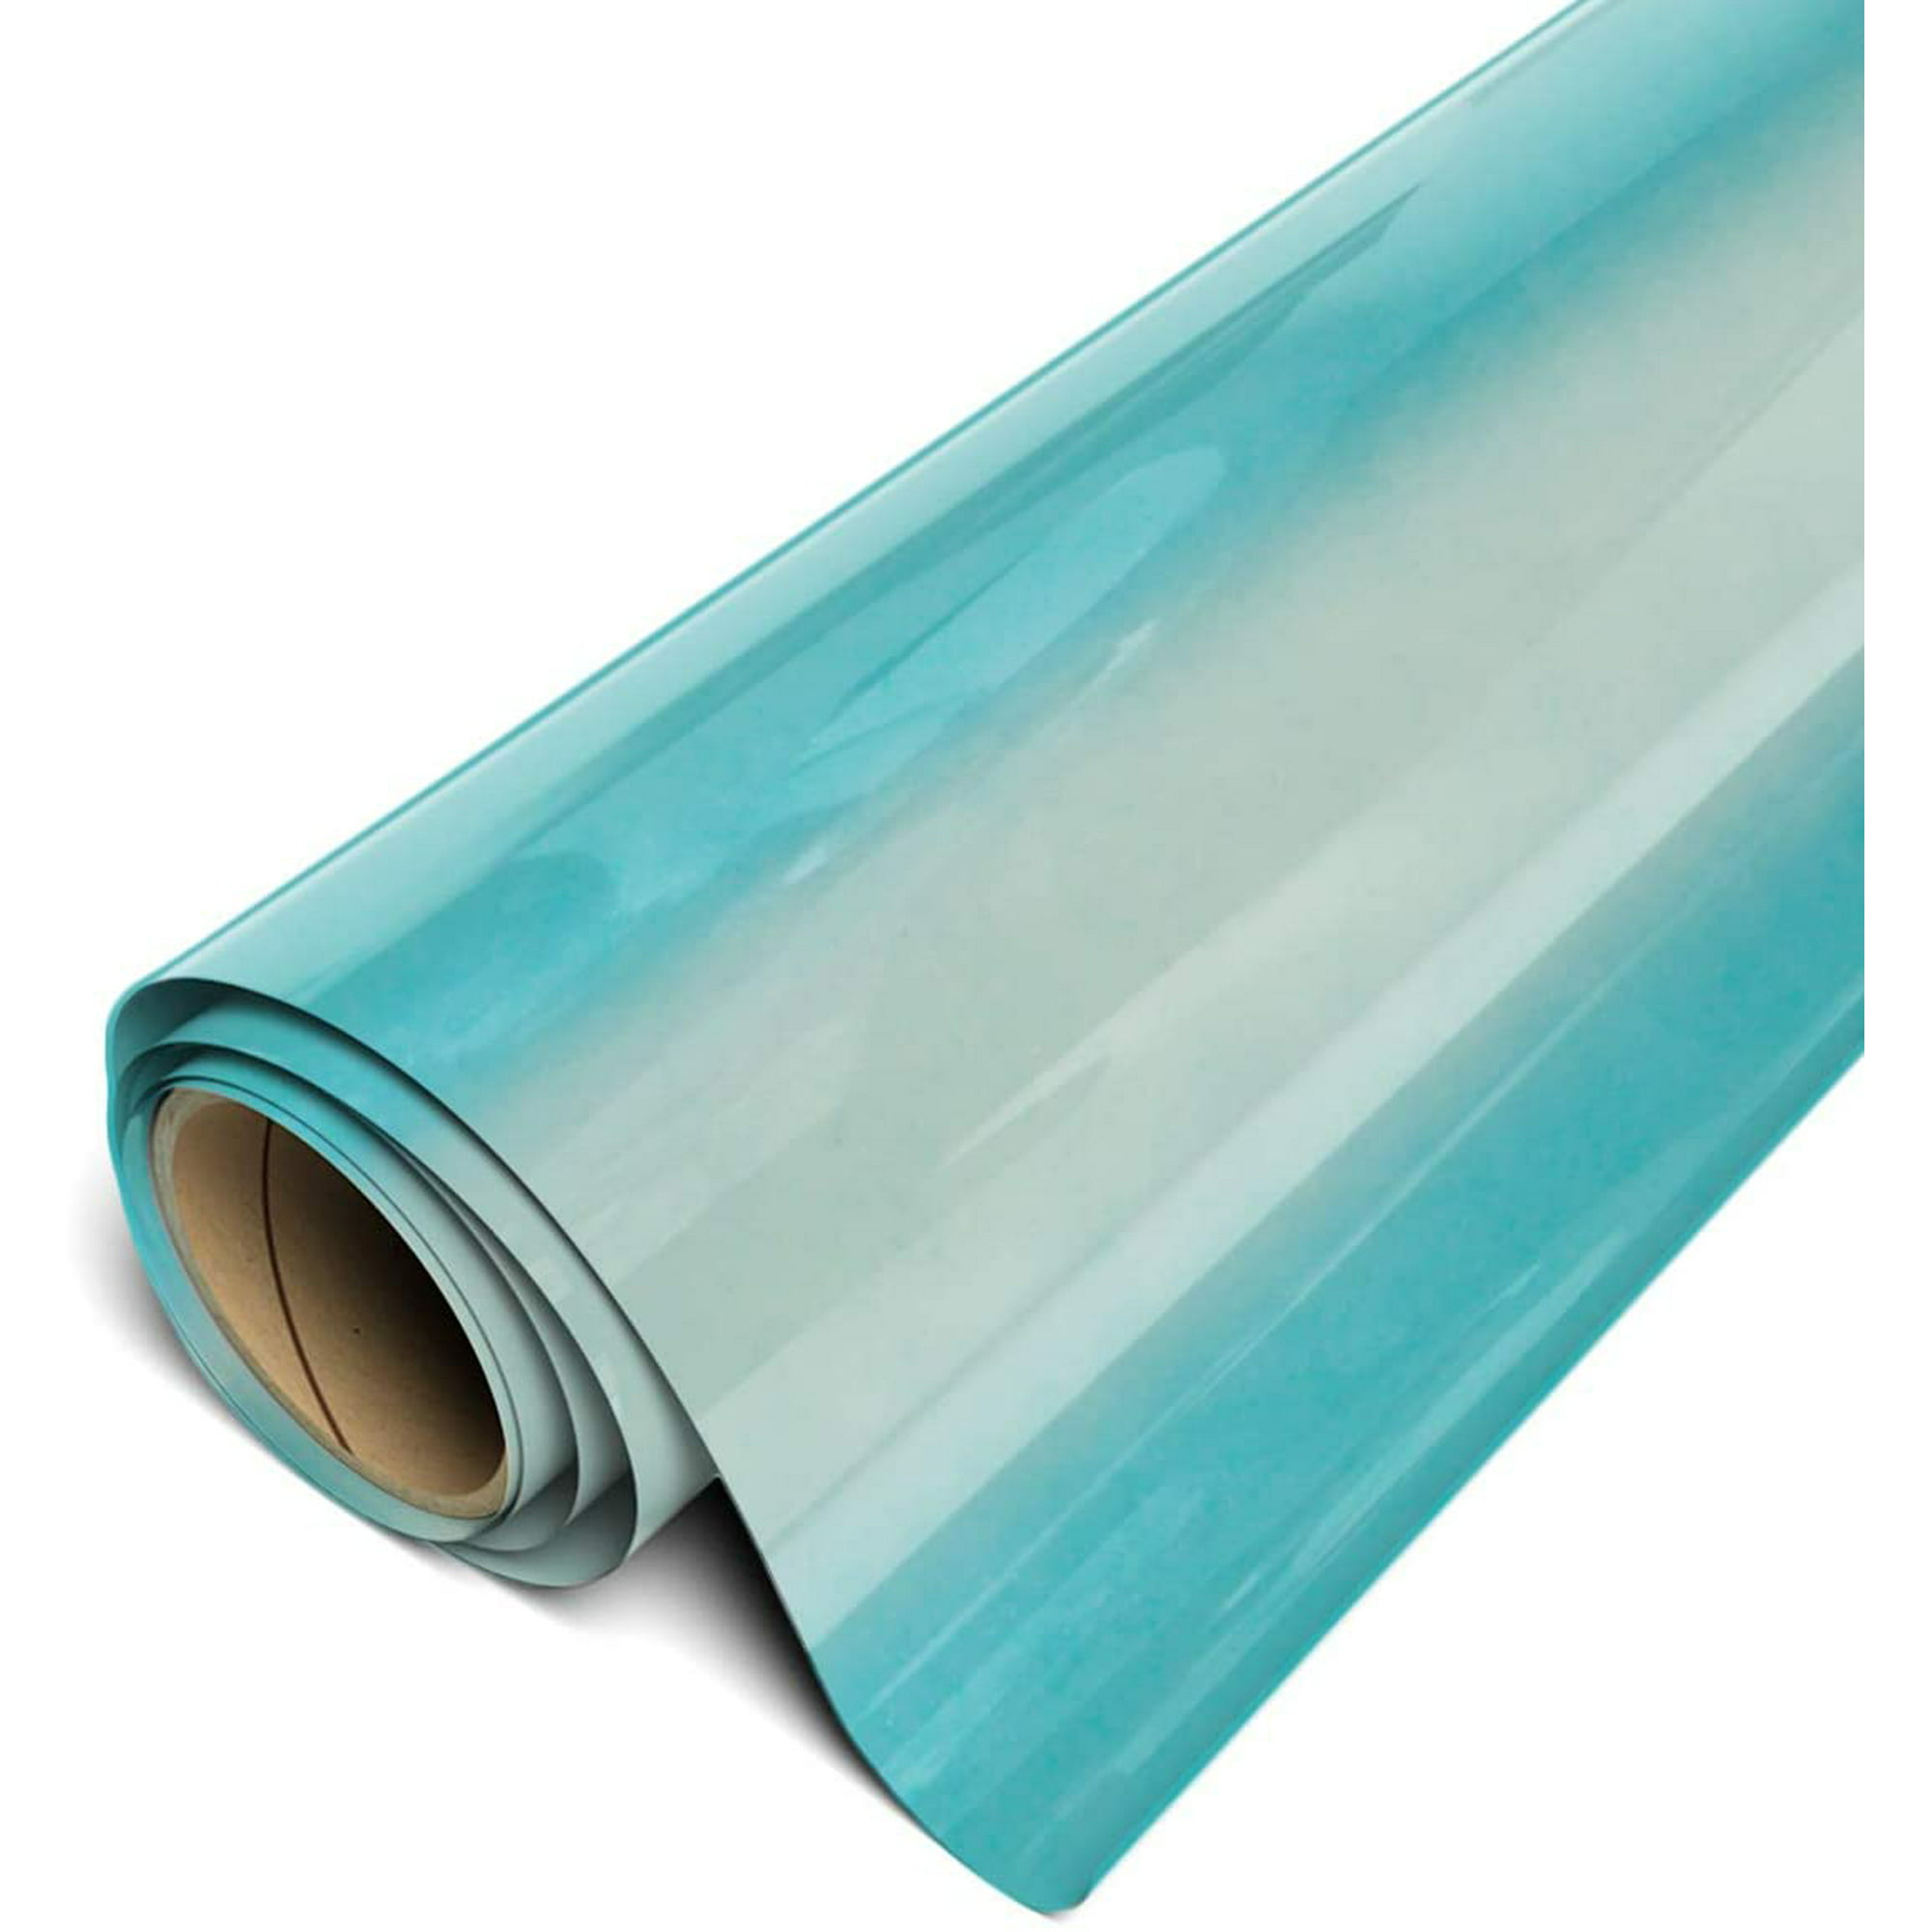 Siser EasyWeed Electric HTV Iron on Heat Transfer Vinyl 15 inch x 150ft (50 Yards) Roll - Teal, Size: 15 x 150 Feet, Blue